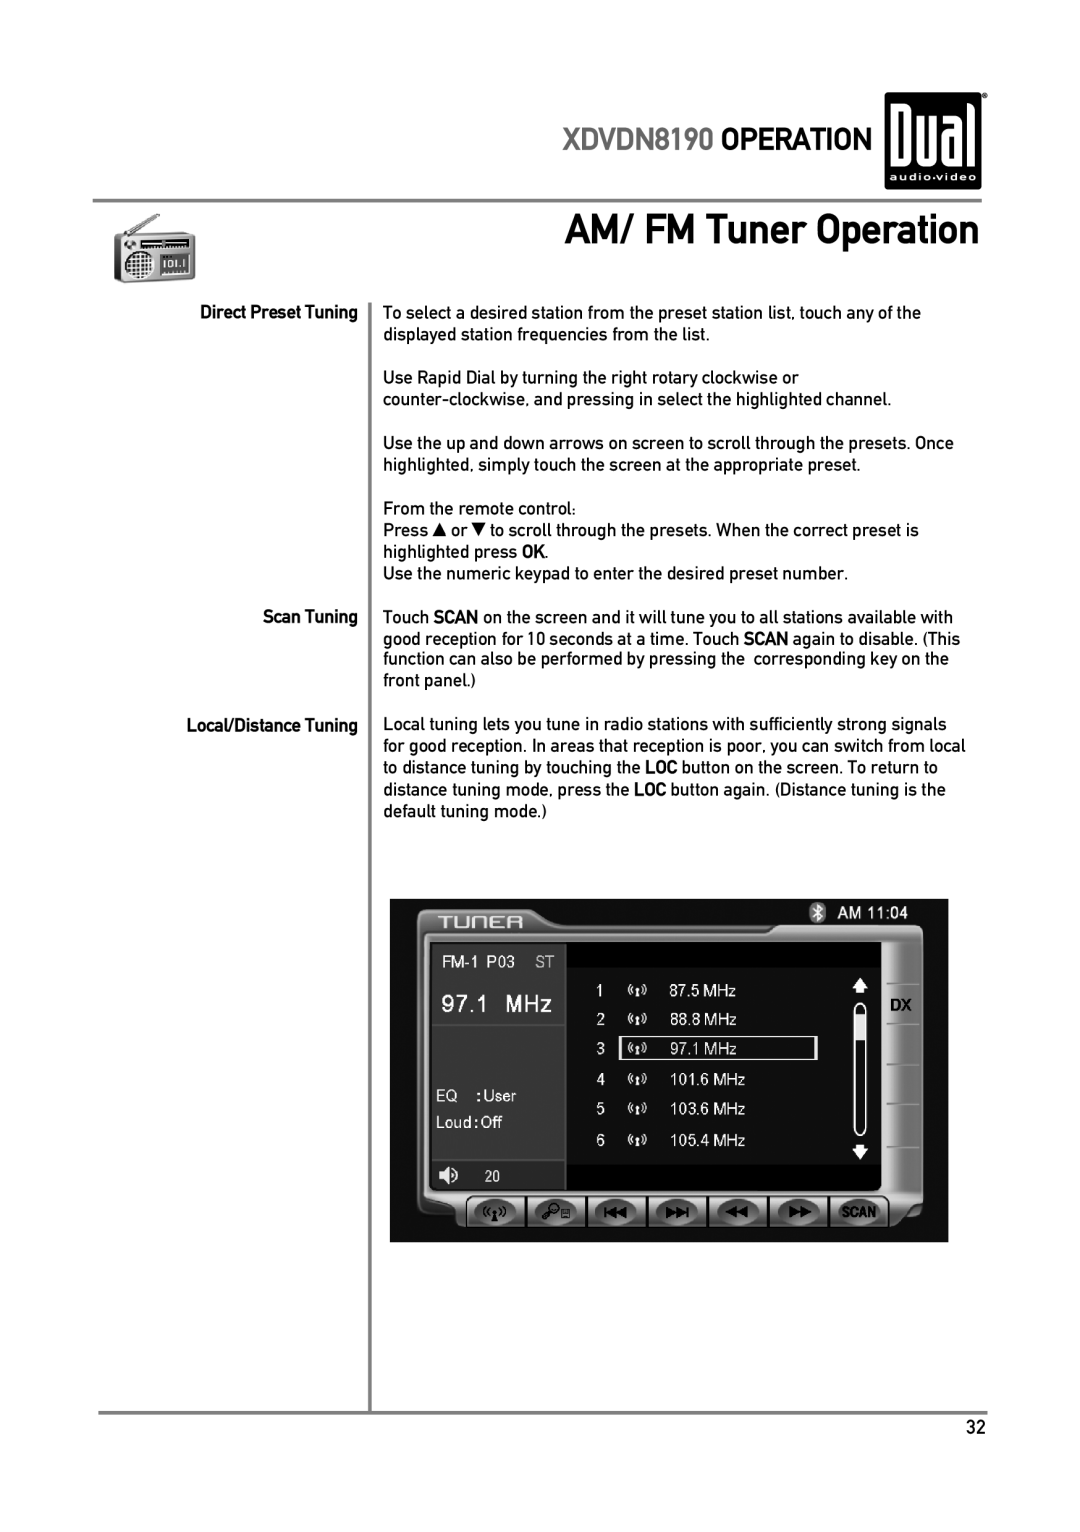 Dual owner manual AM/ FM Tuner Operation, XDVDN8190 OPERATION, Scan Tuning 